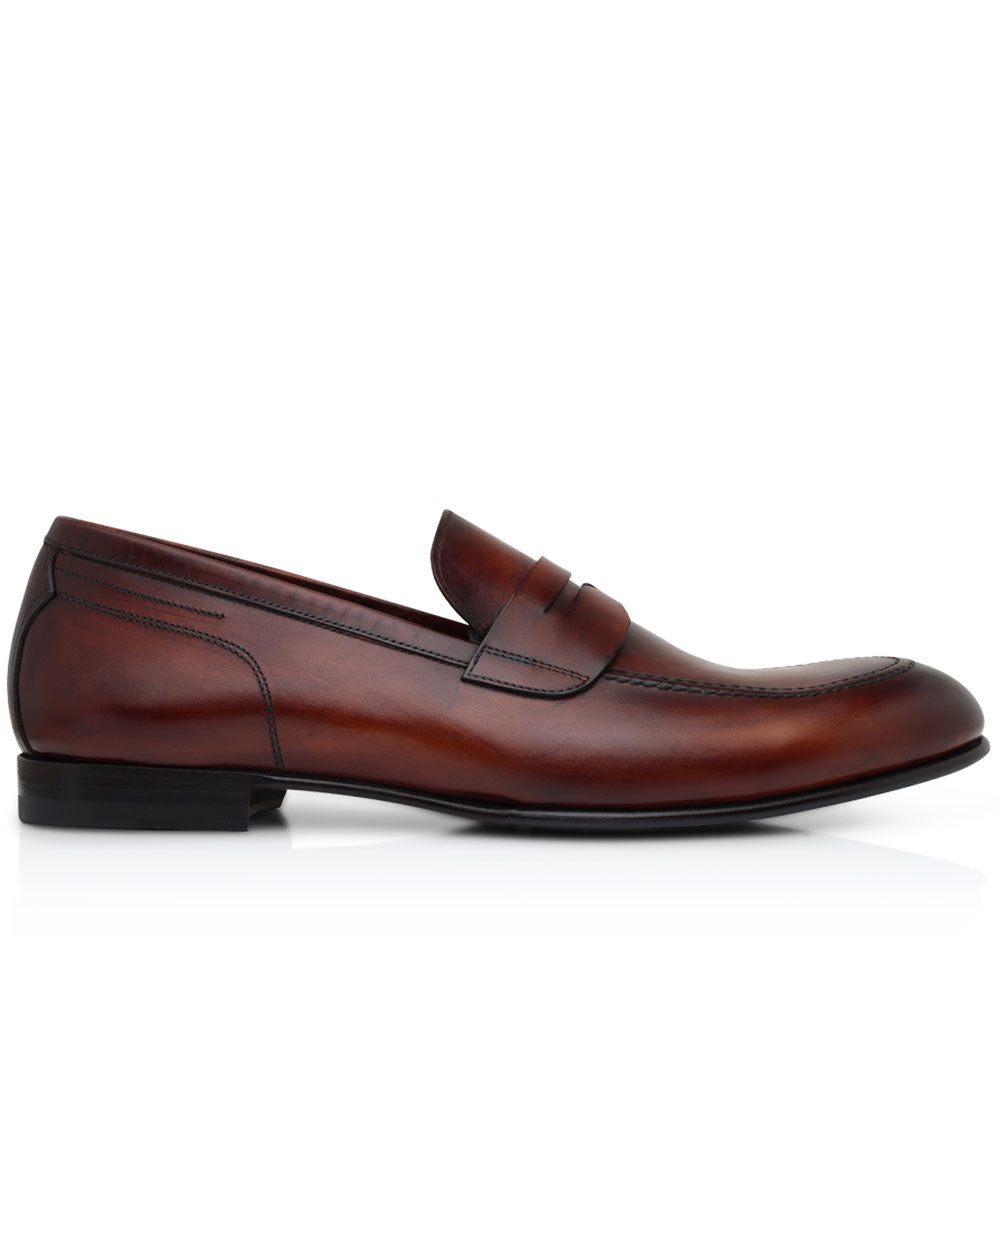 Leather Penny Loafer in Cognac